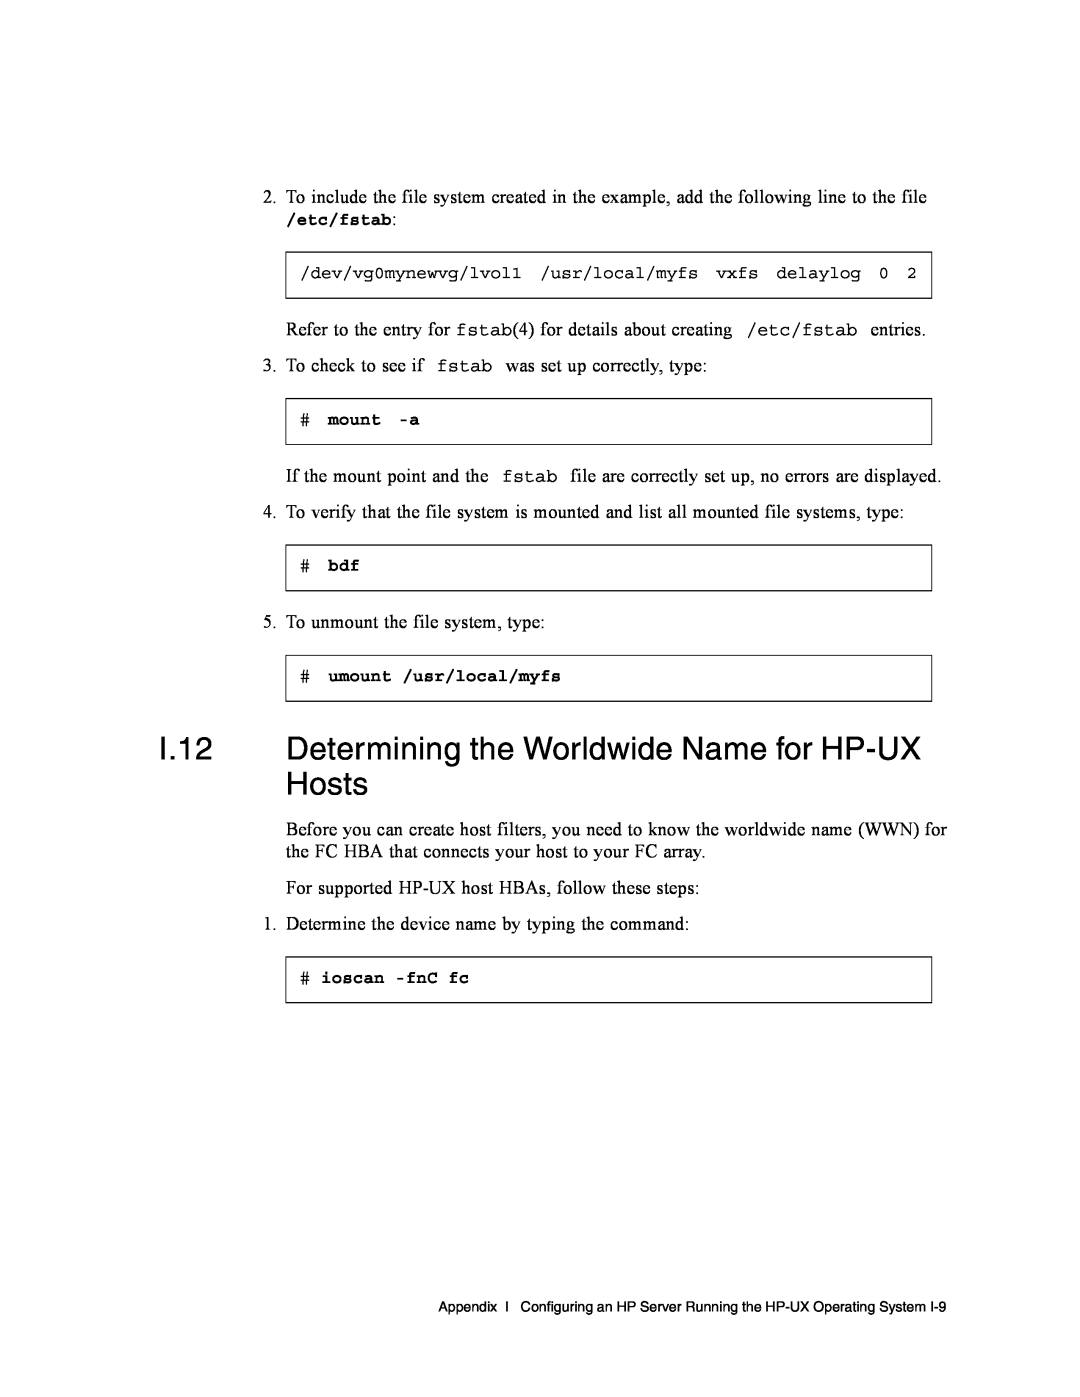 Dot Hill Systems II 200 FC service manual I.12 Determining the Worldwide Name for HP-UX Hosts, etc/fstab, # mount -a, # bdf 